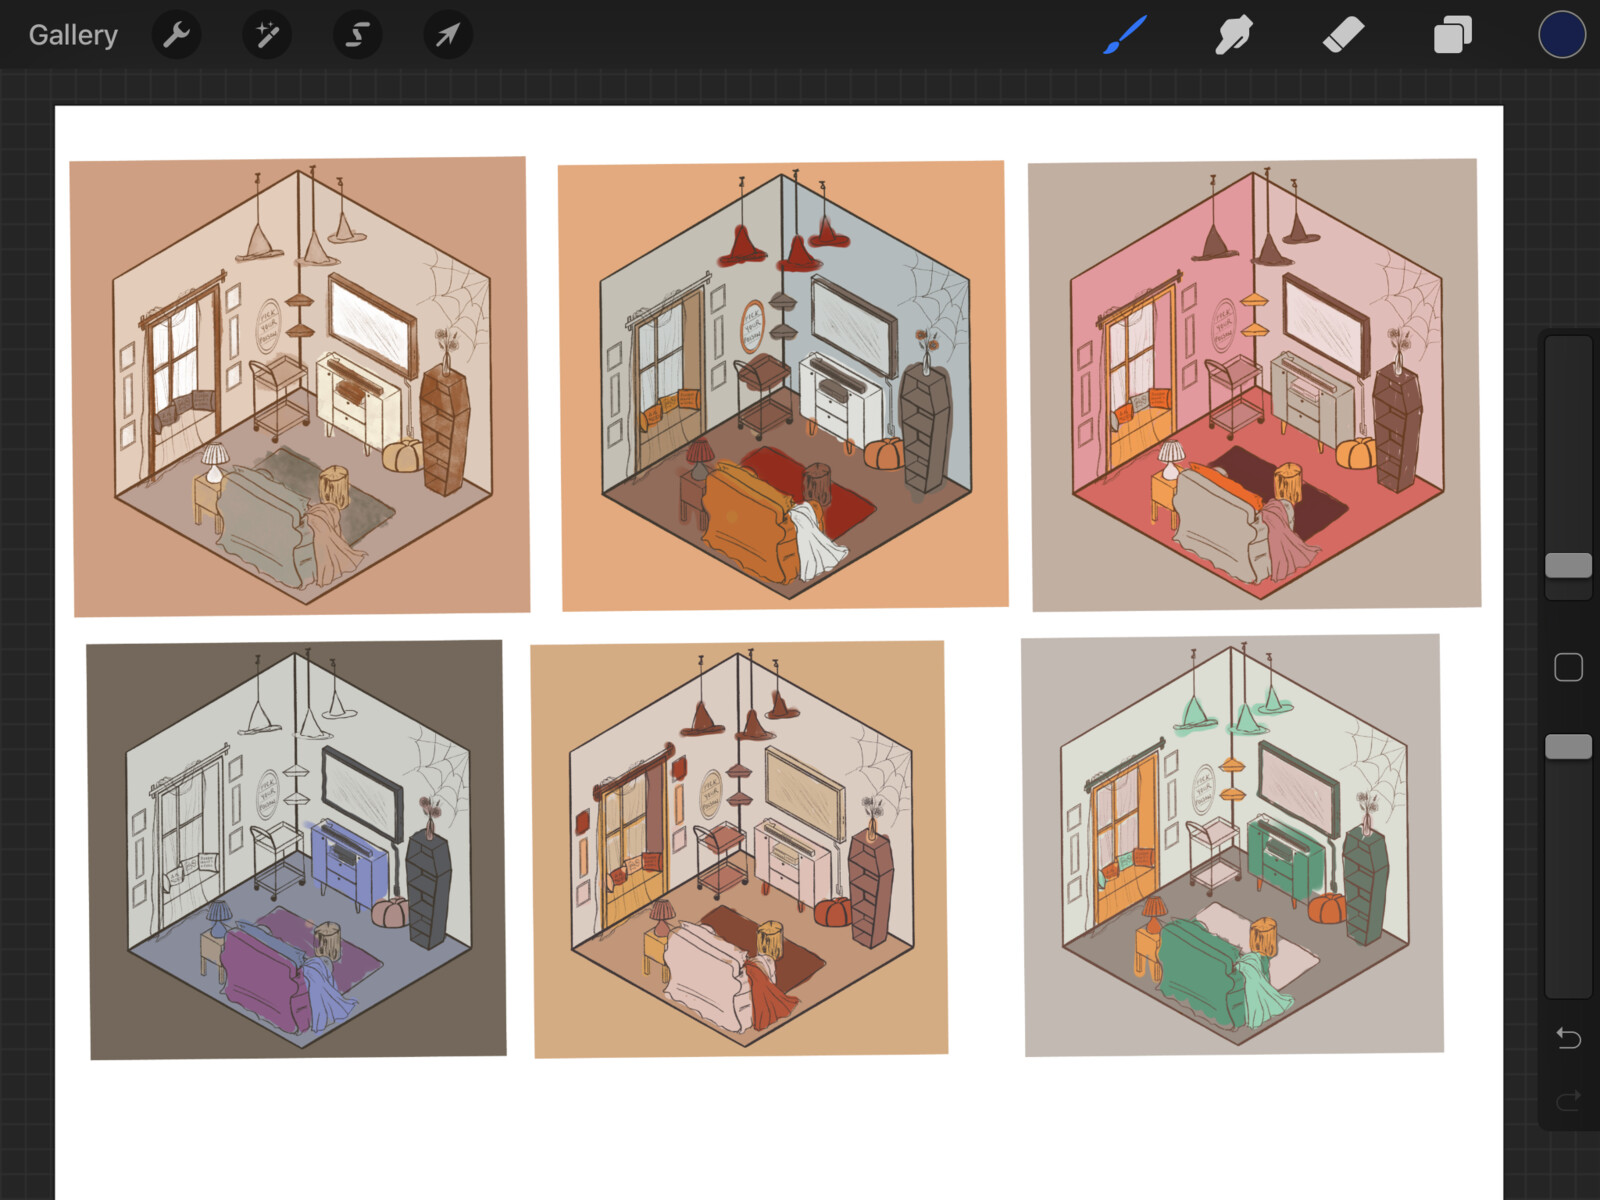 working through thumbnails for color palette